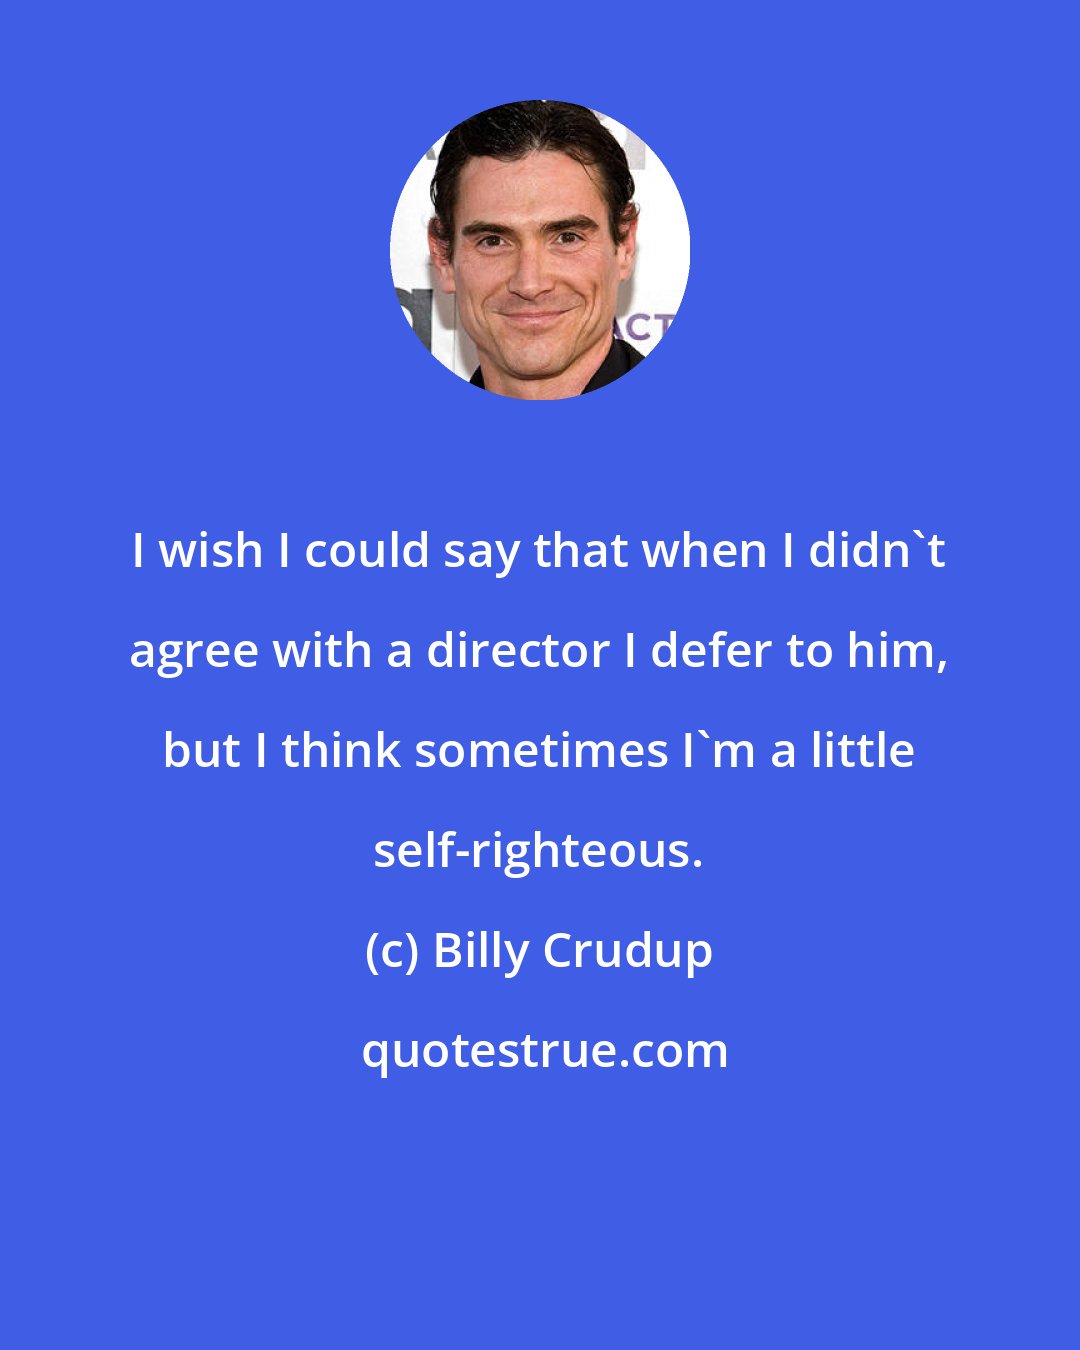 Billy Crudup: I wish I could say that when I didn't agree with a director I defer to him, but I think sometimes I'm a little self-righteous.